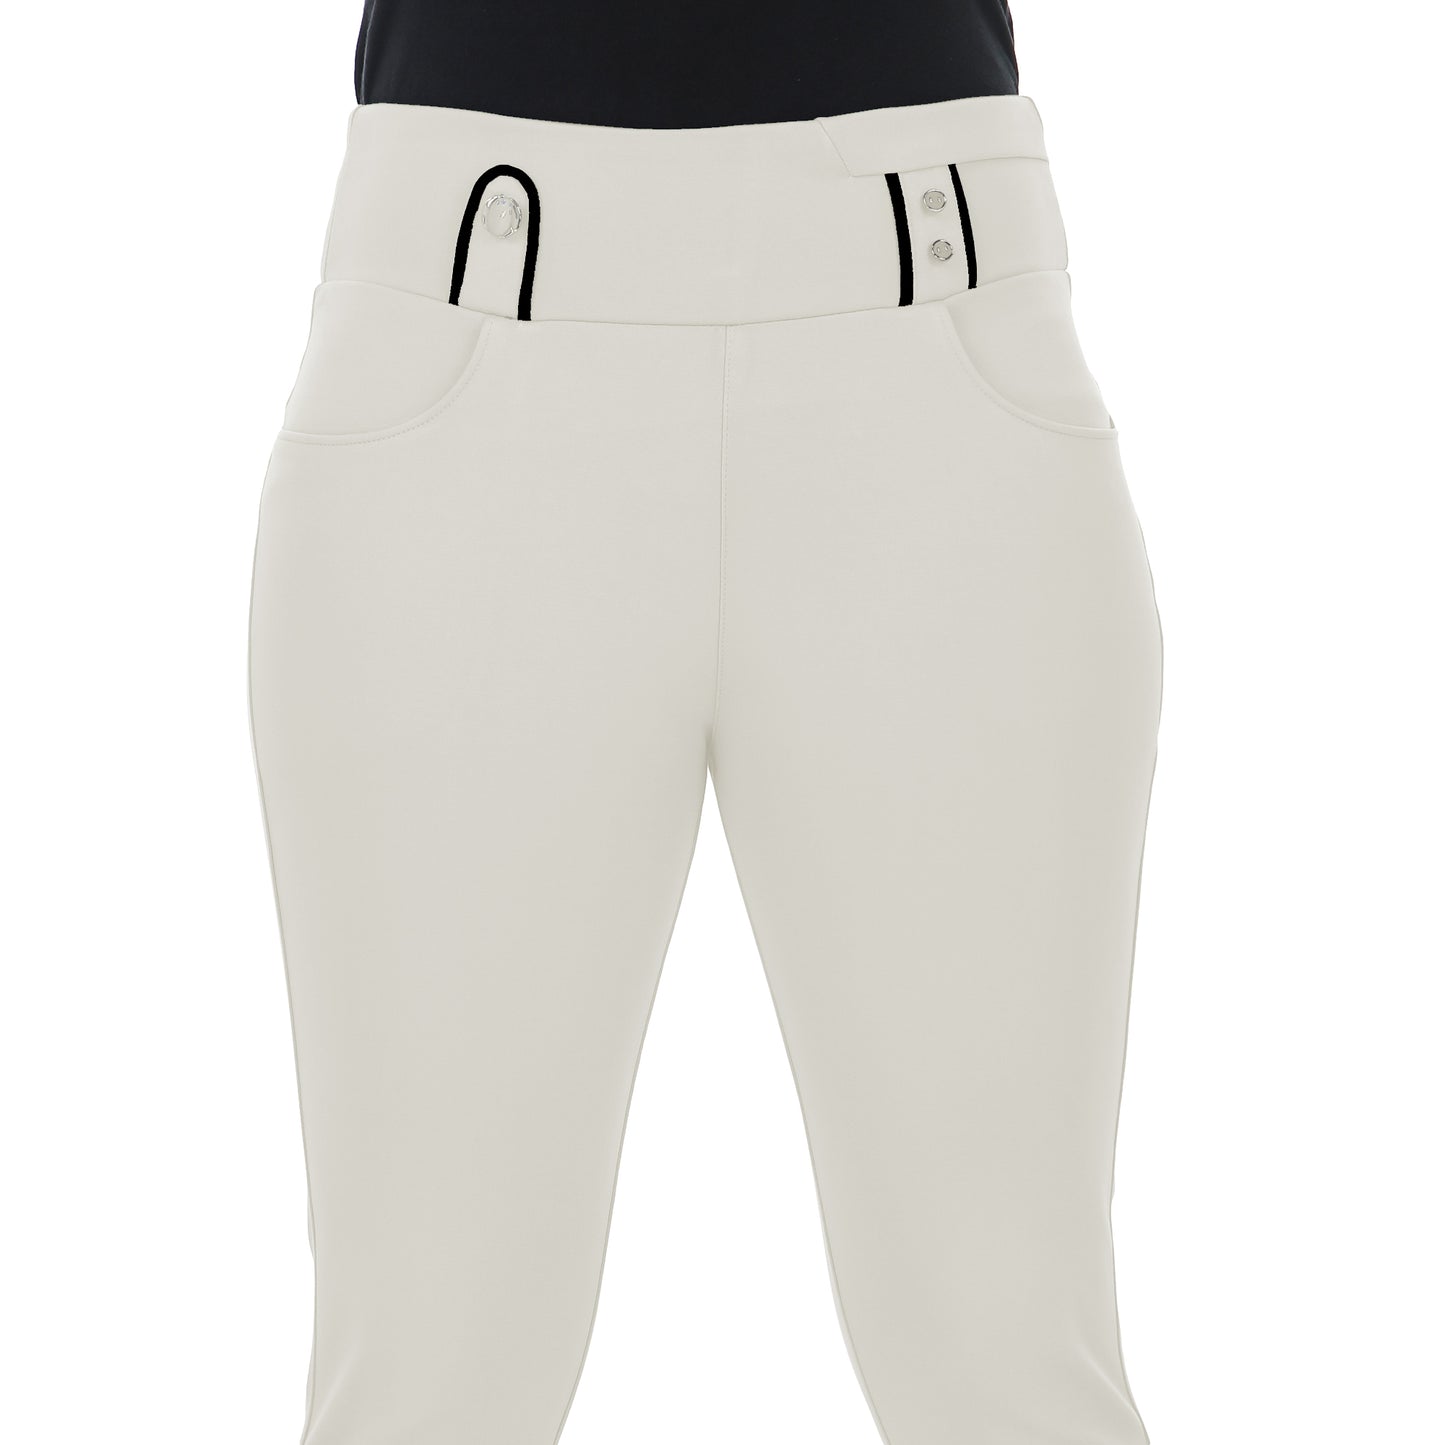 ComfortFit Women's Mid-Waist Jeggings with 2 Front Pockets - Off White